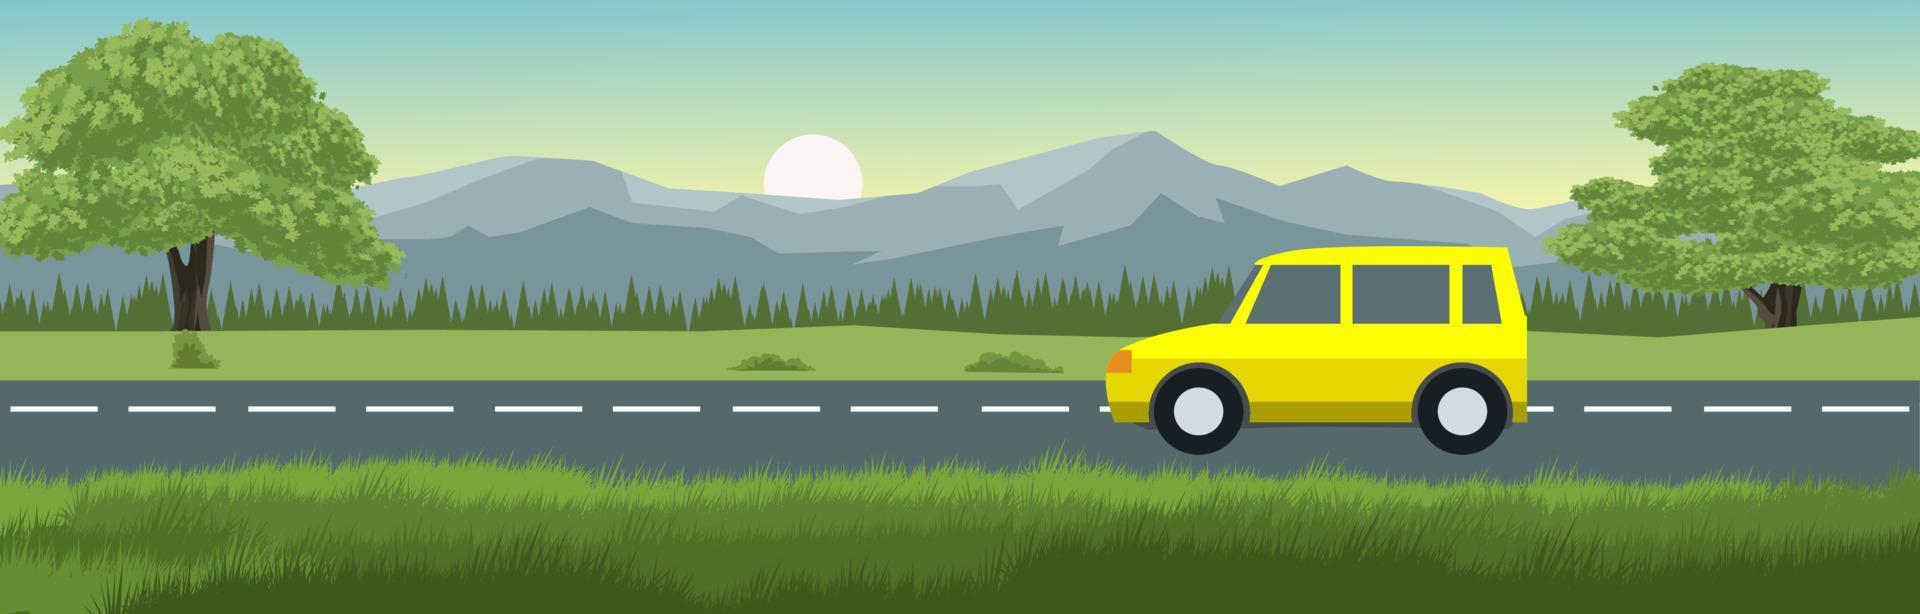 Vector landscape illustration with a car on the road